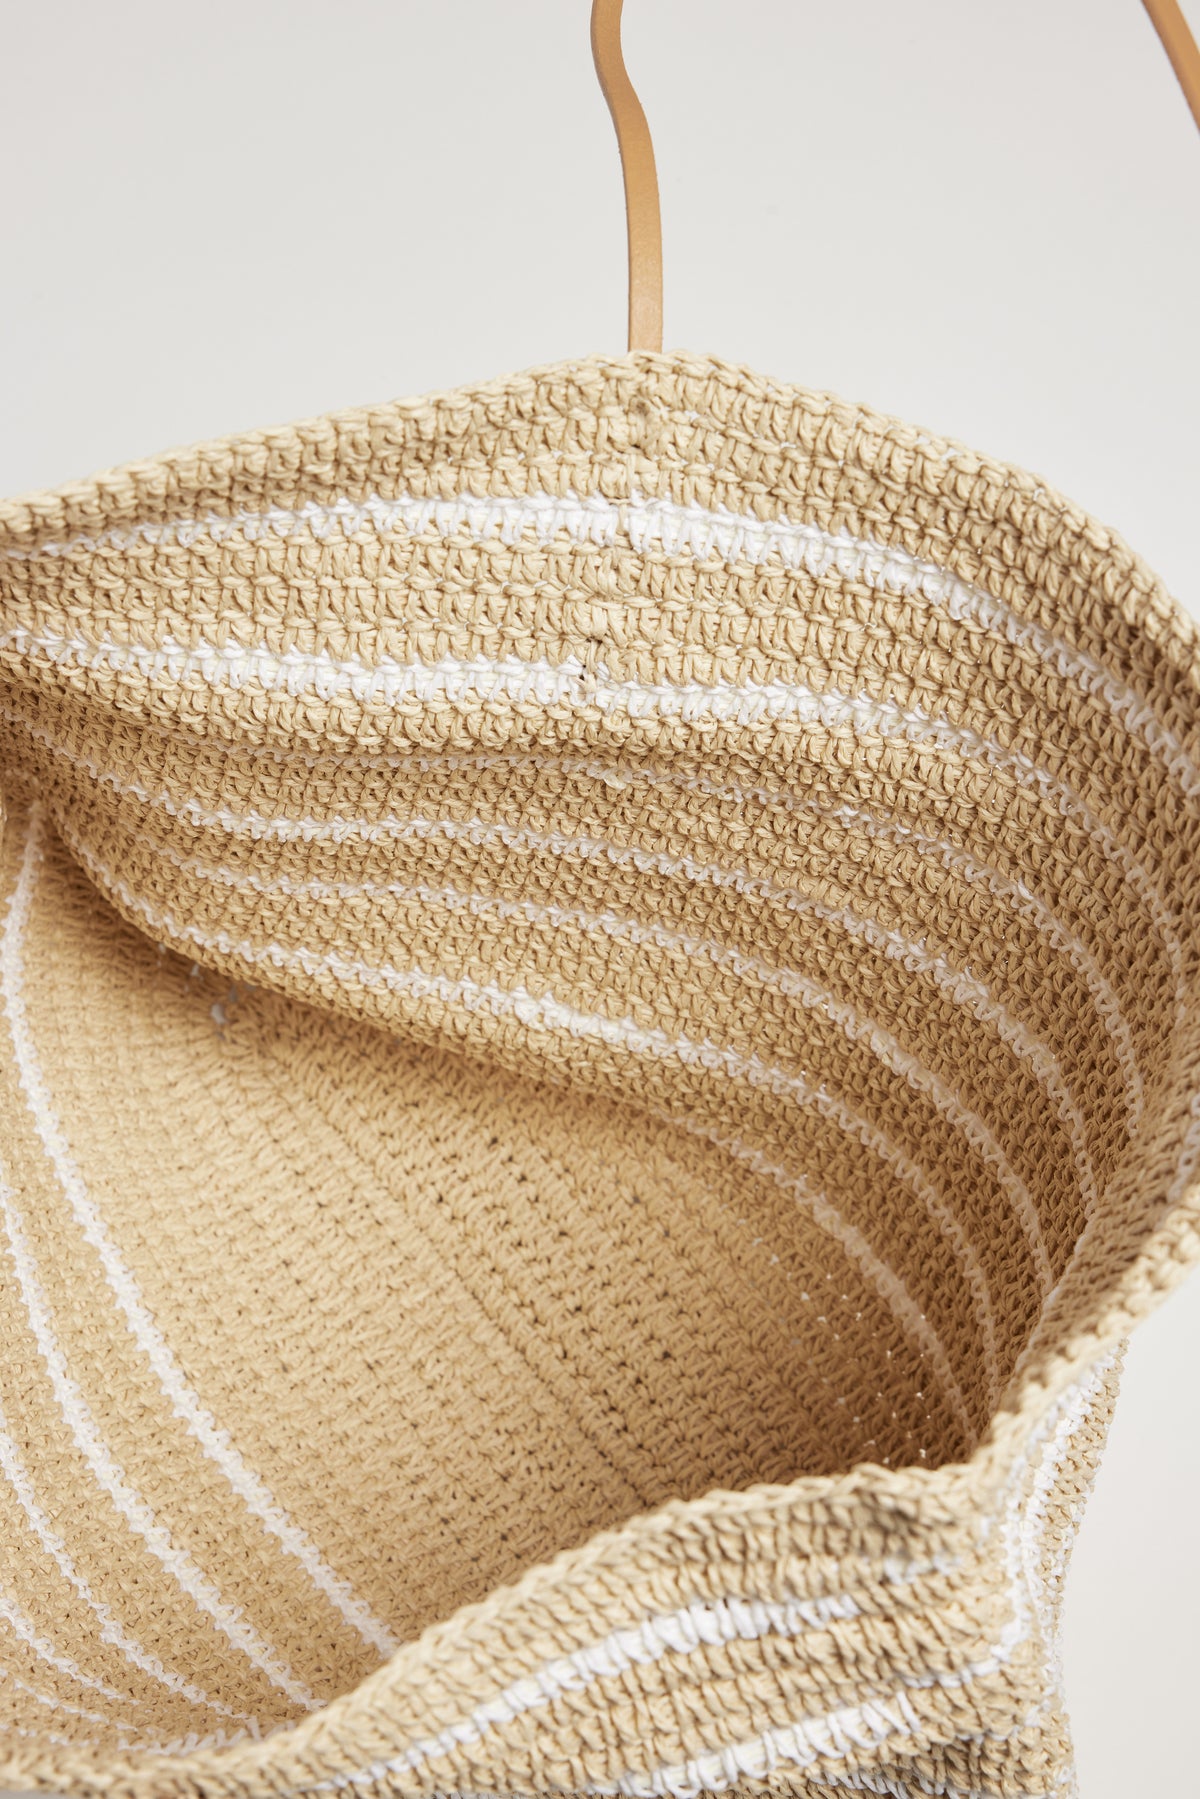   Close-up view of a versatile accessory, a Velvet by Graham & Spencer woven straw hat hanging on a hook against a plain background, highlighting its textured details and curved brim. 